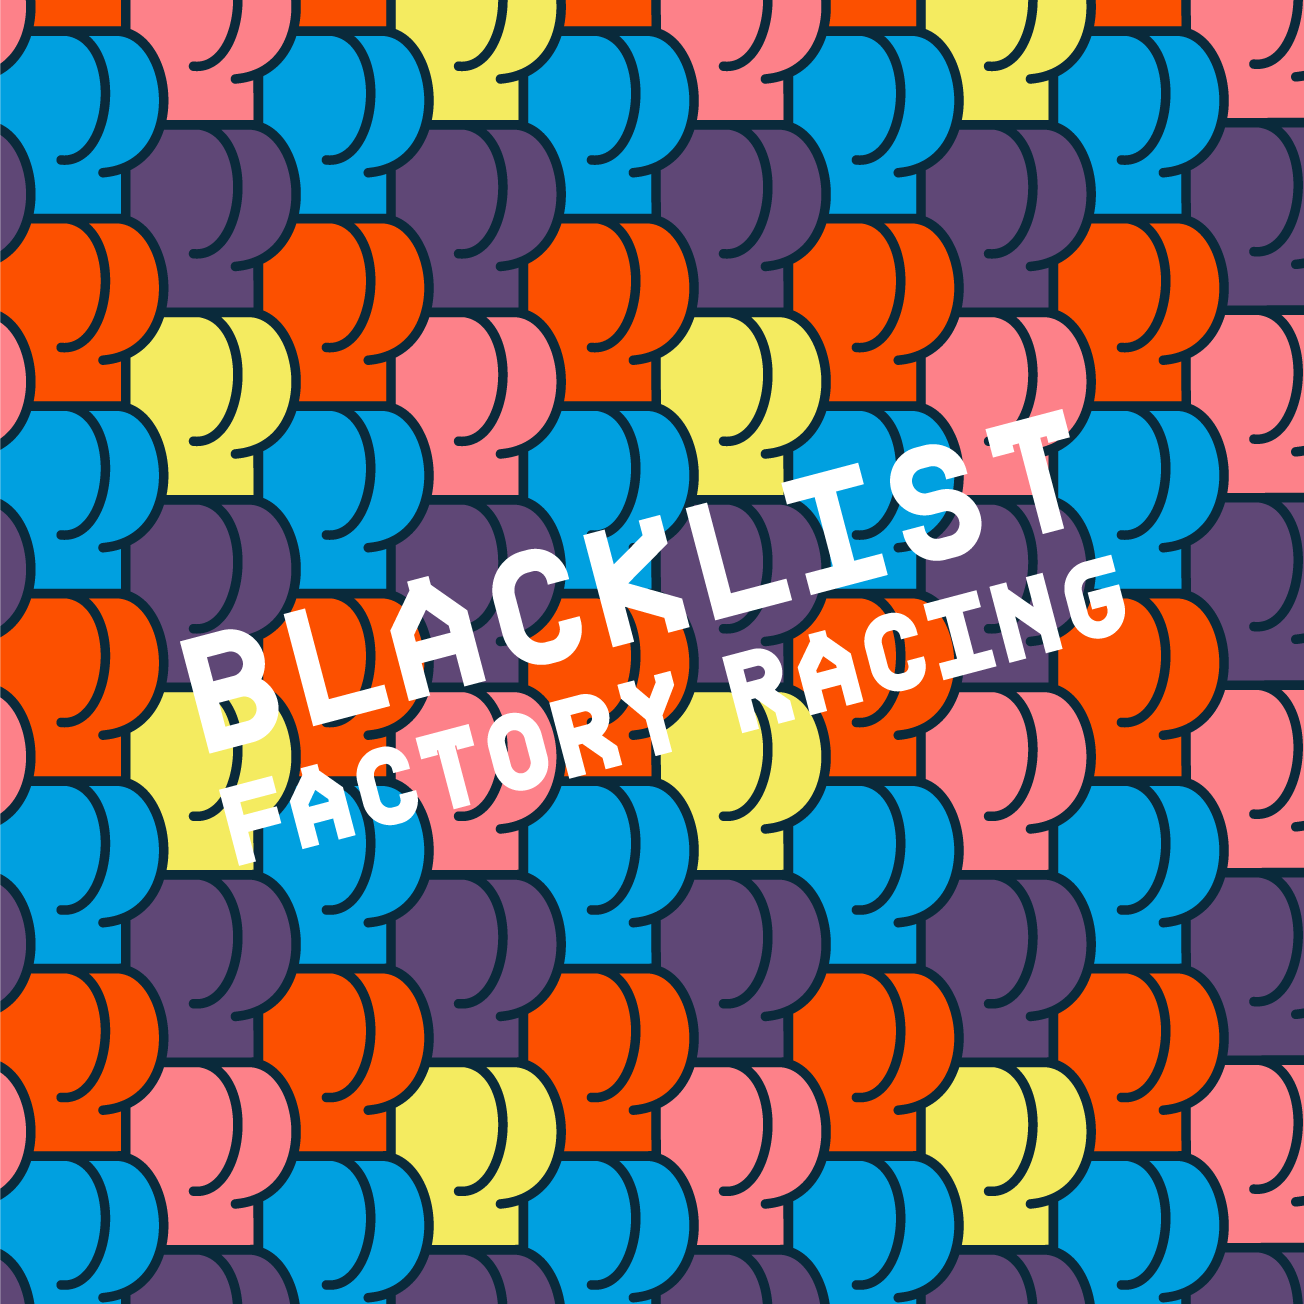 Club Image for BLACKLIST FACTORY RACING